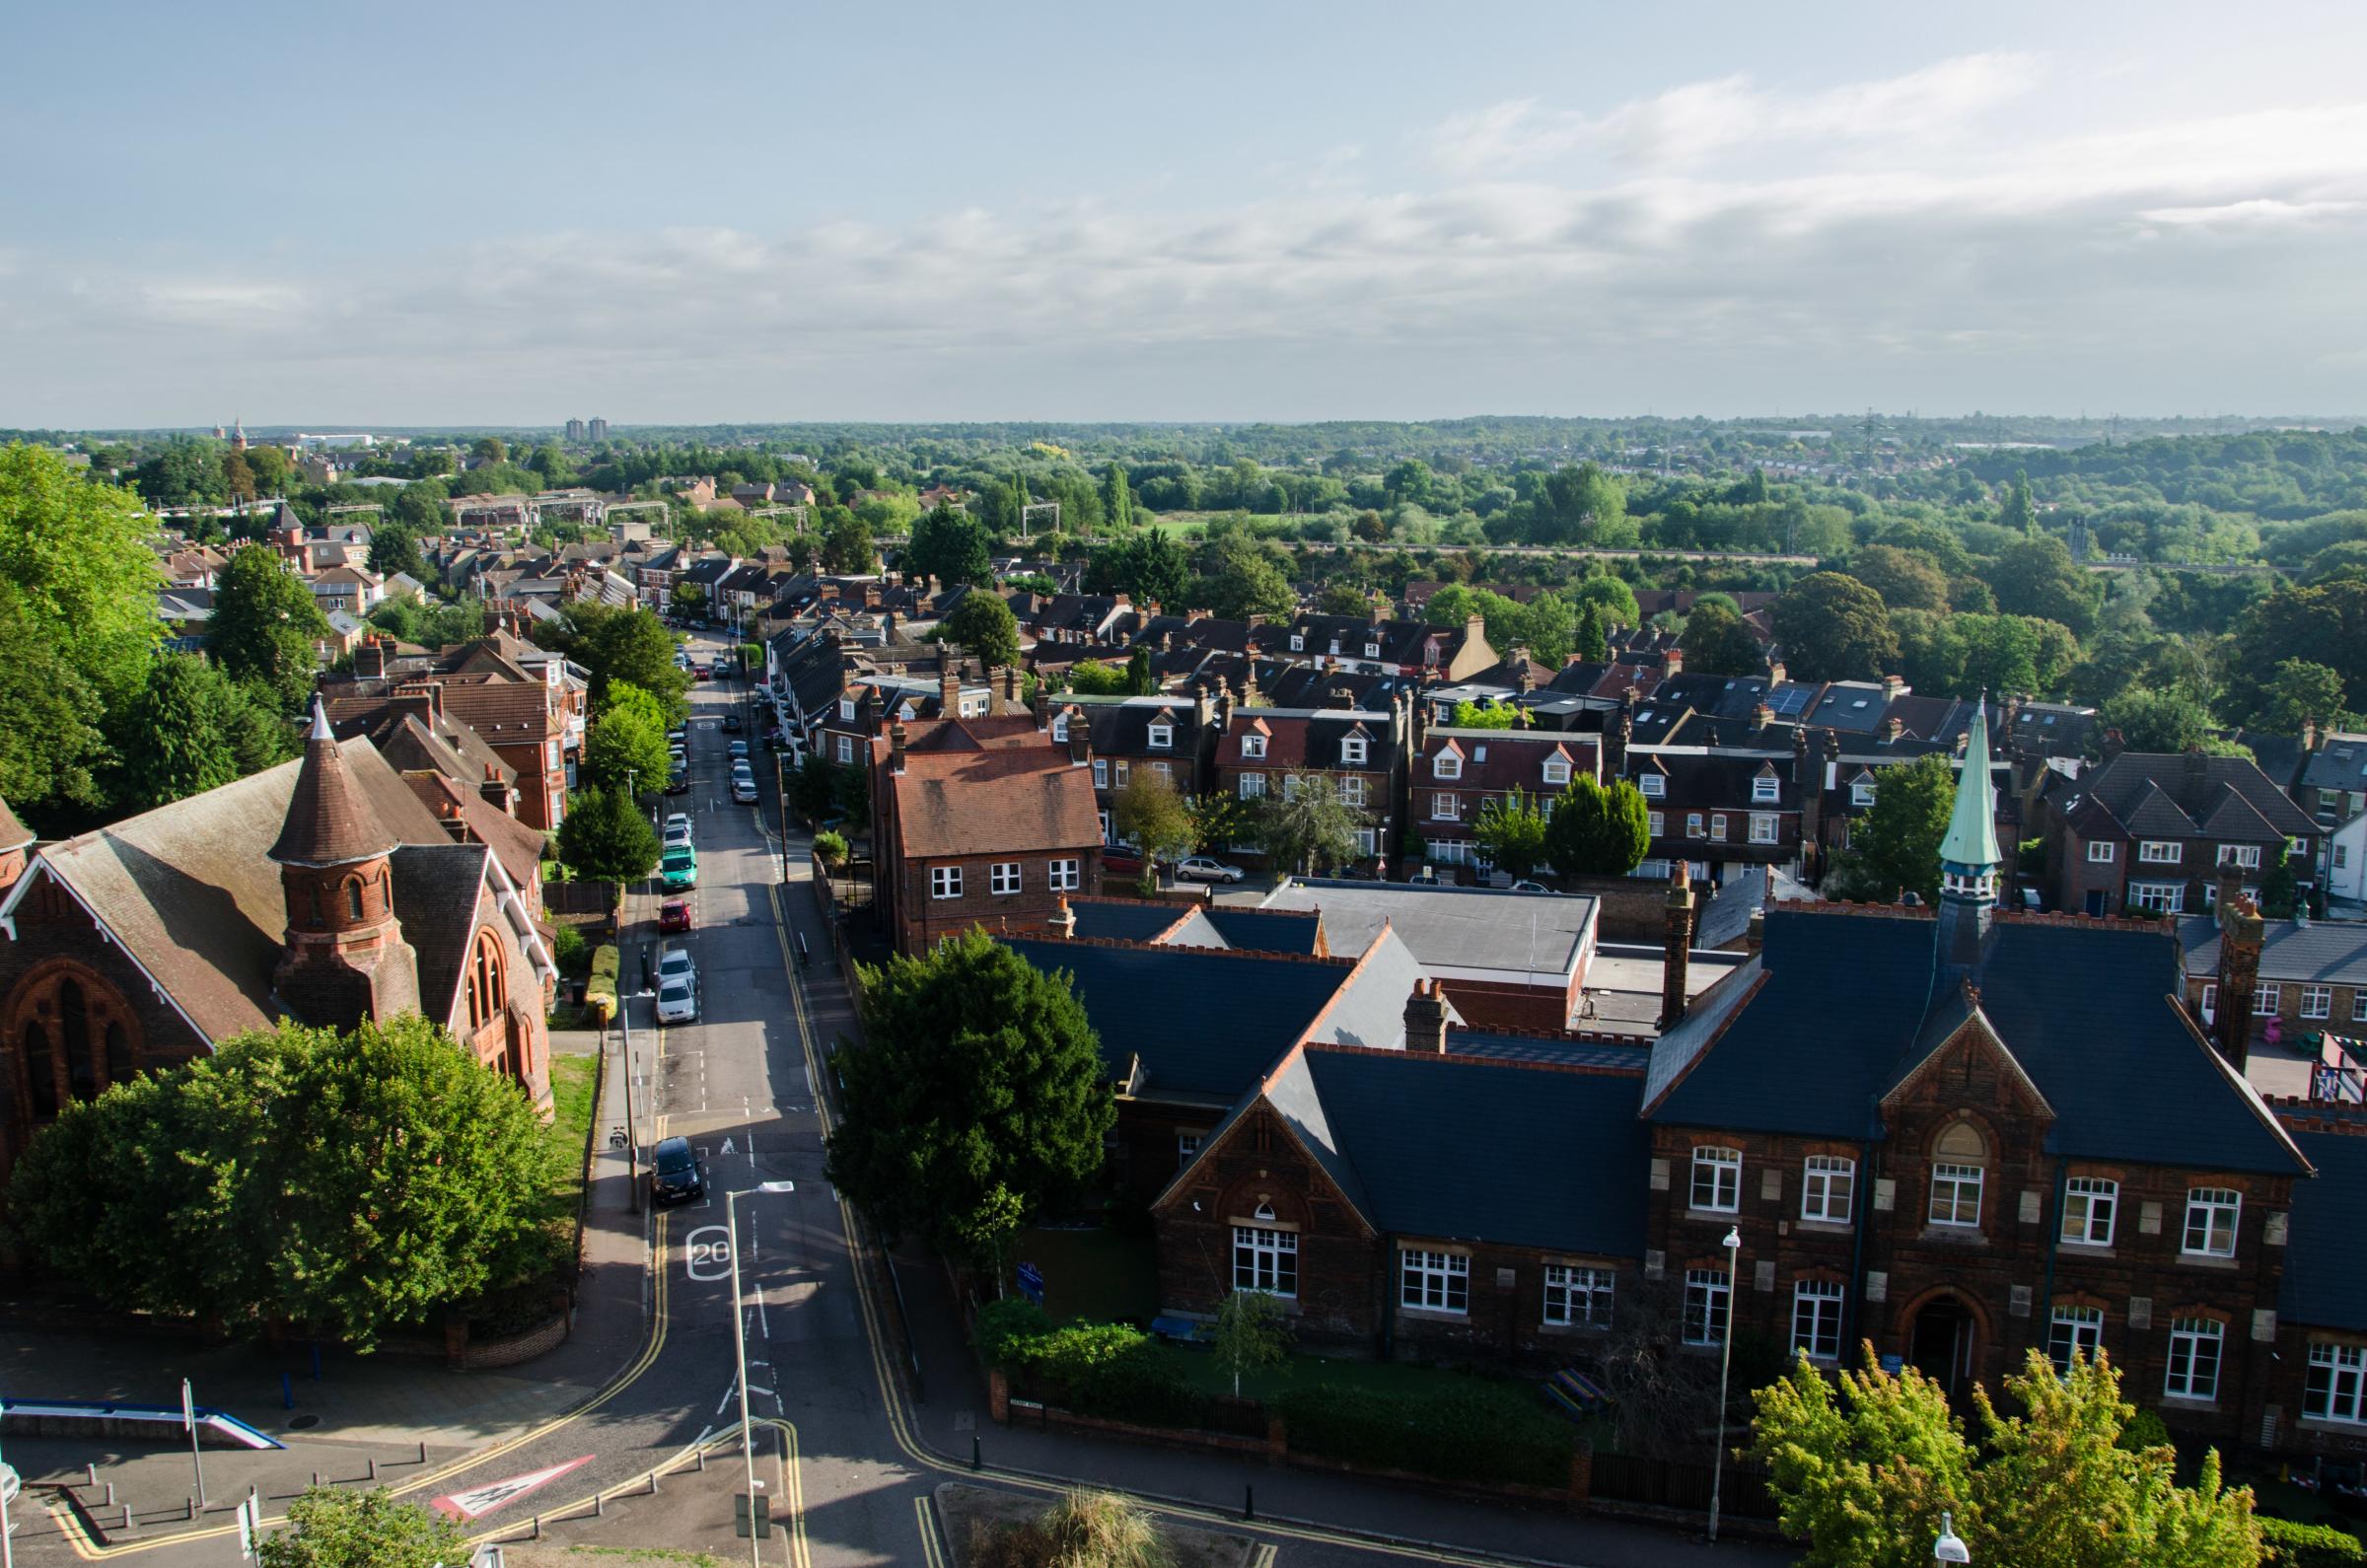 A general view over an area of Watford. Credit: Watford Borough Council 